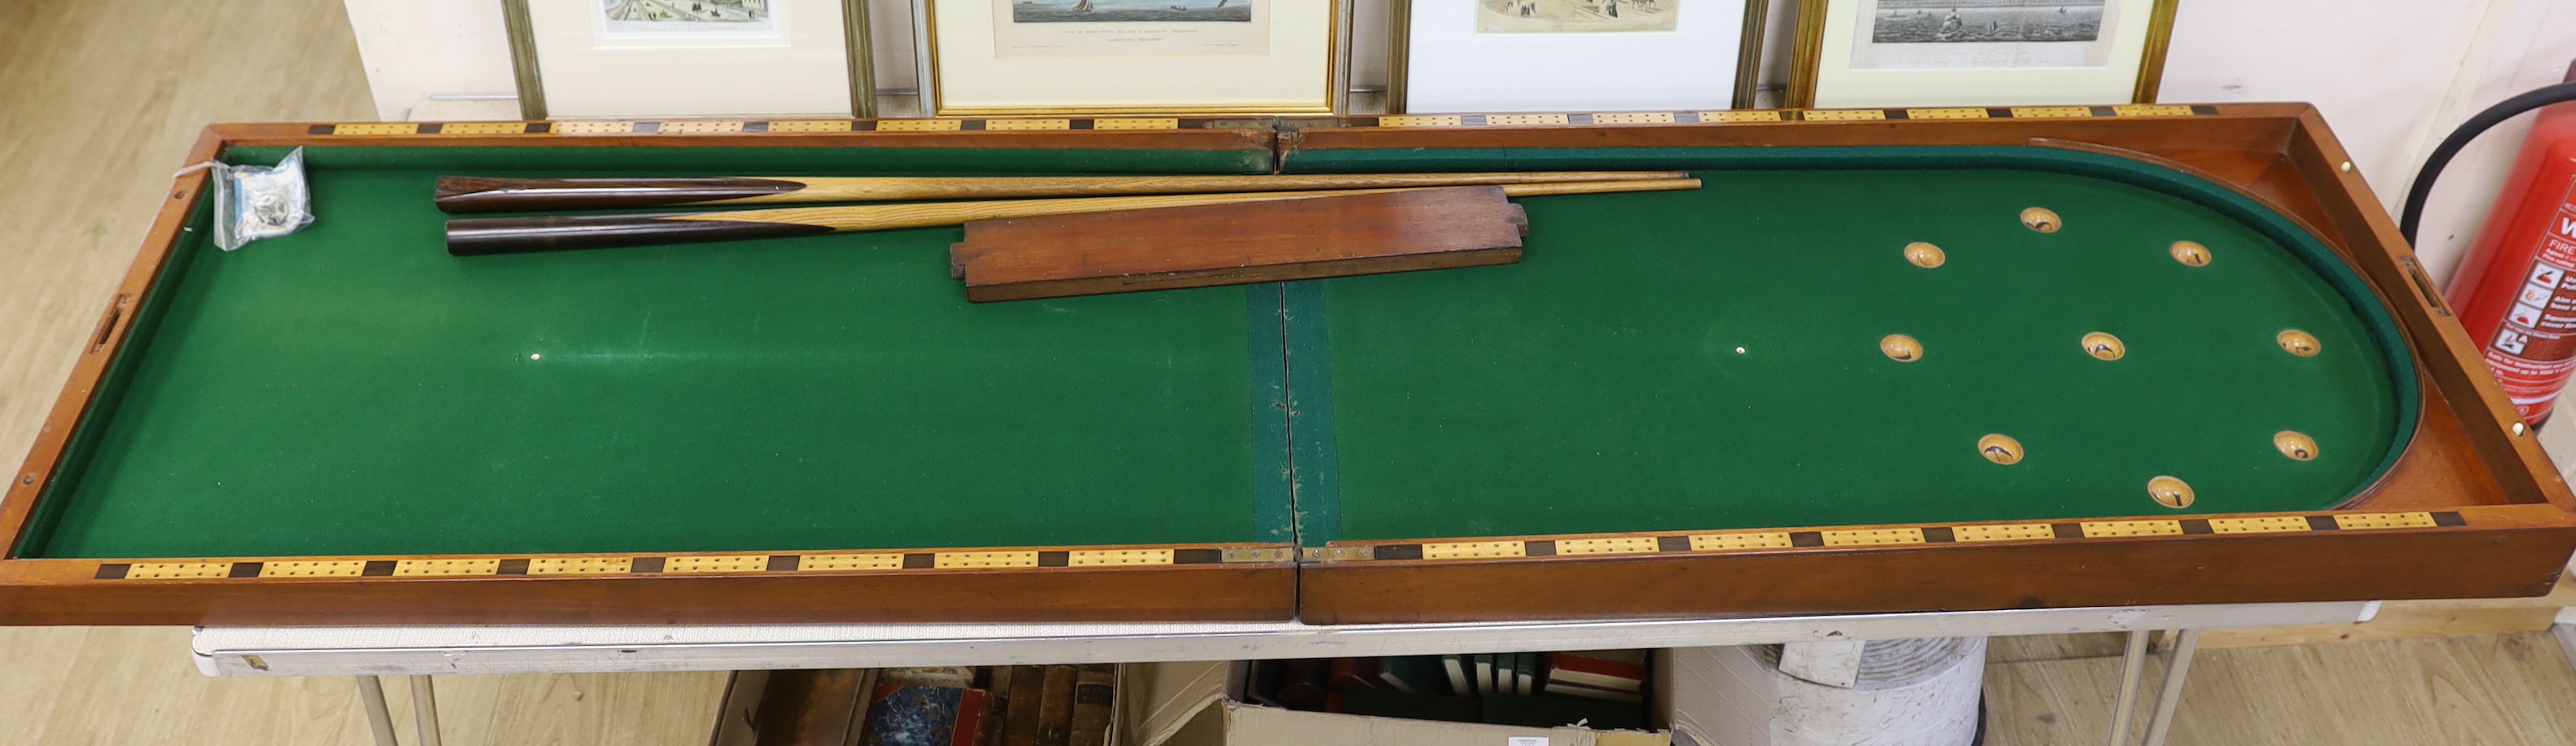 A Victorian folding cased bagatelle board, green baize interior with markers and two cues, 223.5cm open